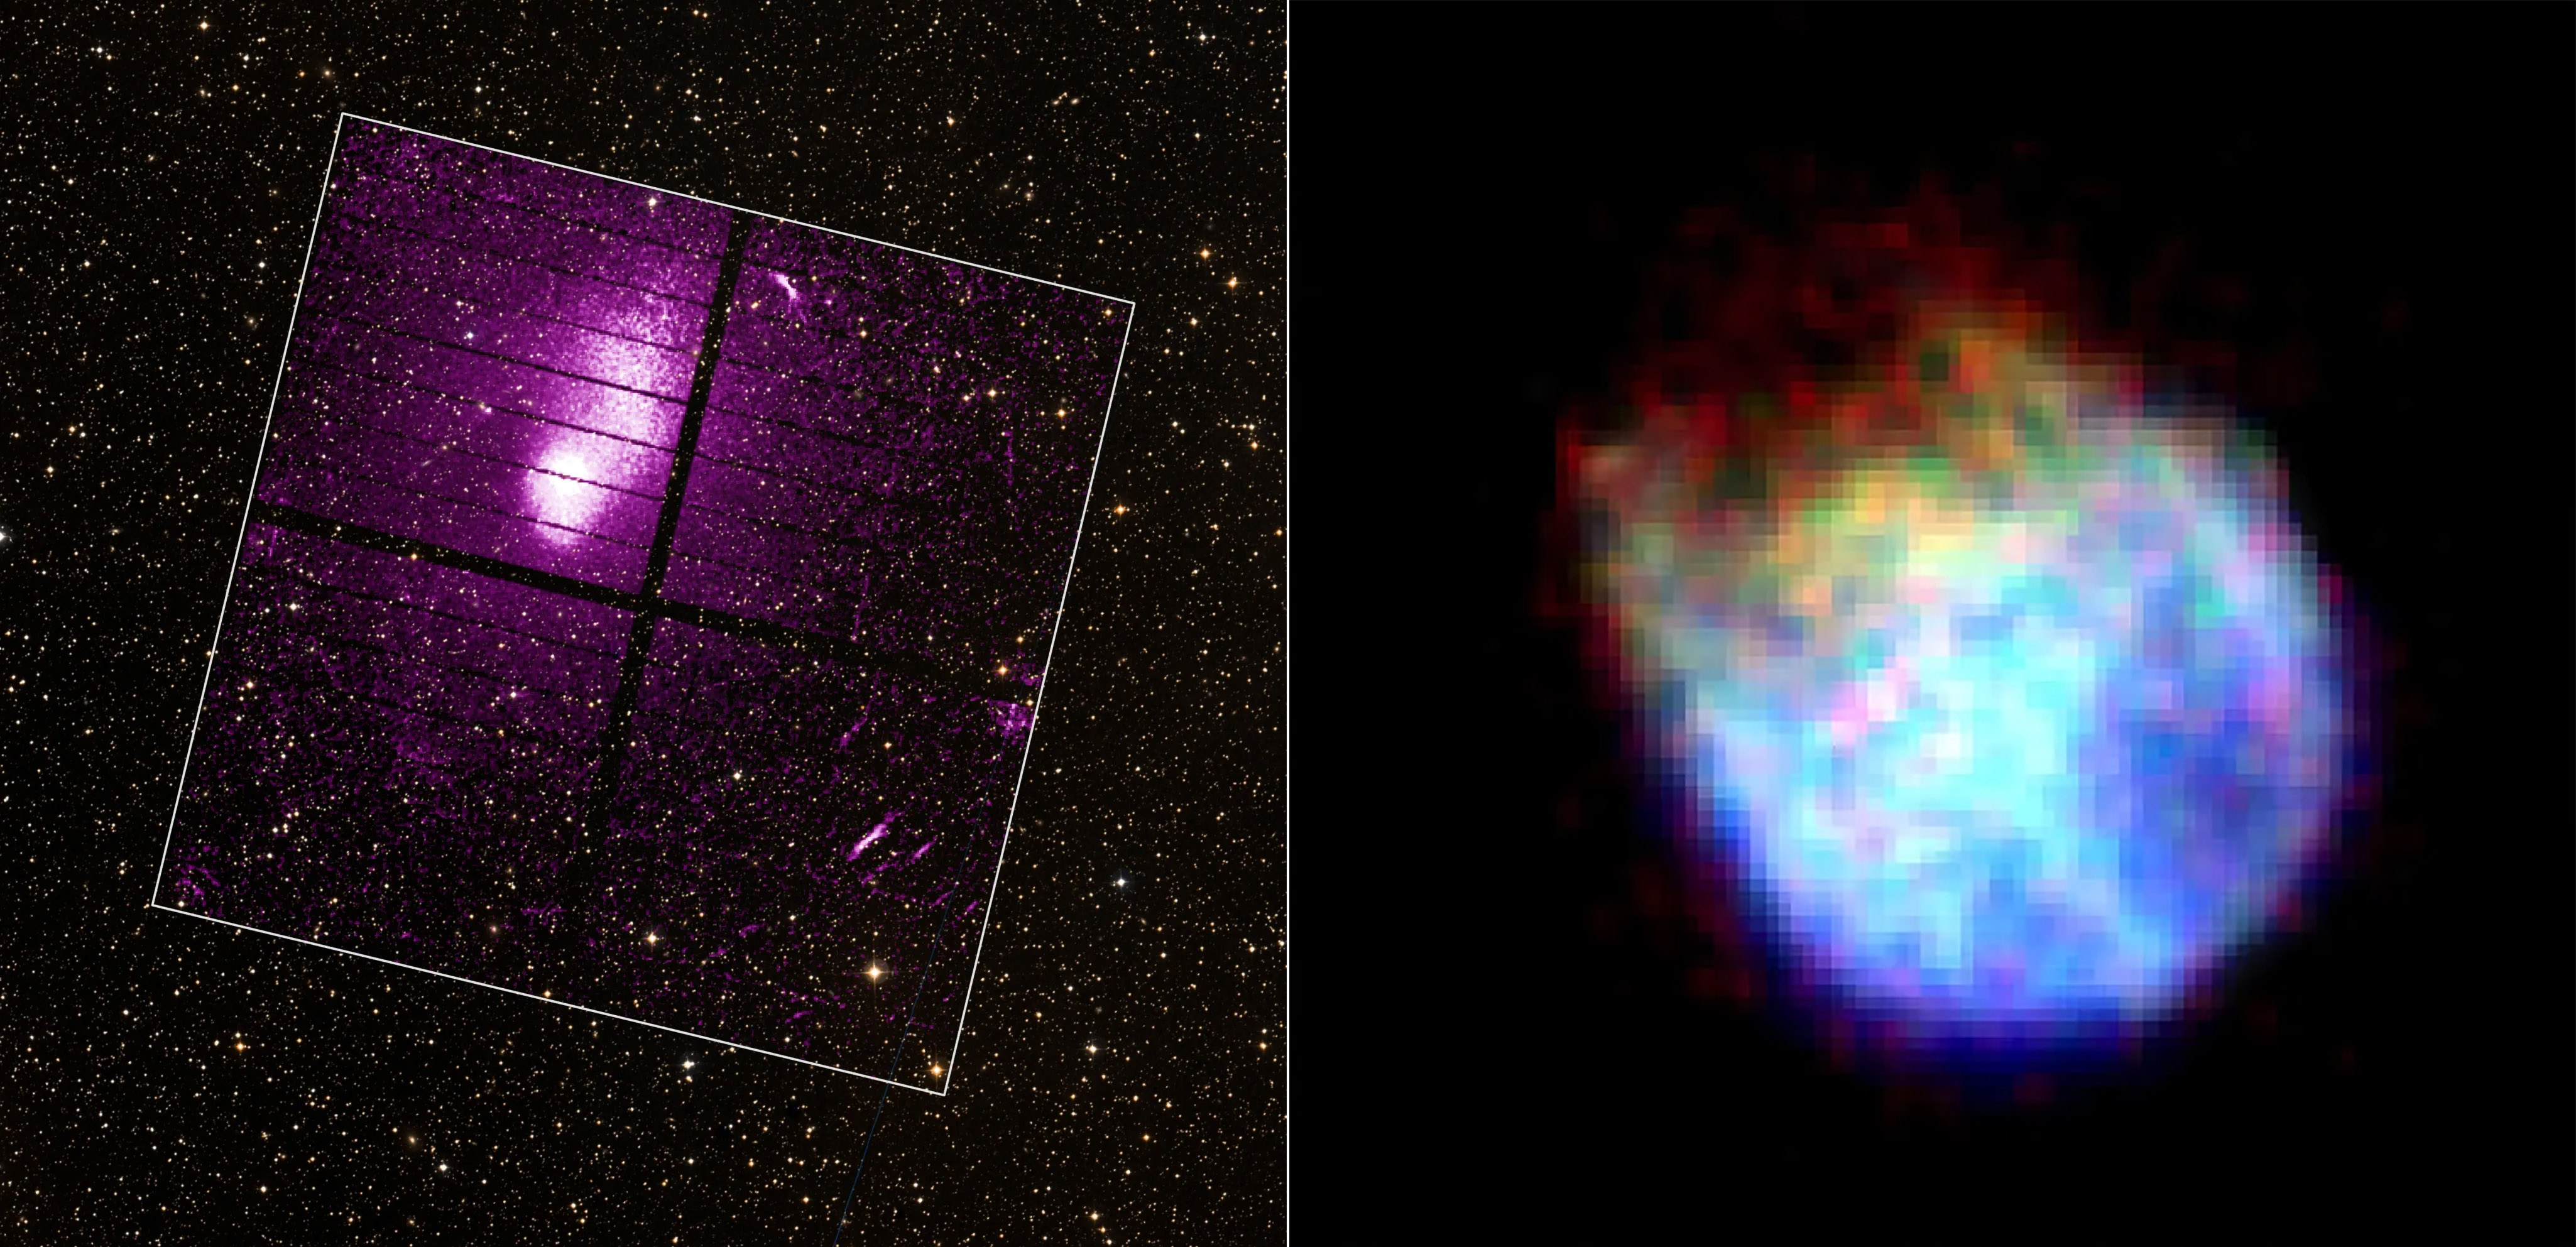 Abell 2319 is shown in purple on the left, while the supernova remnant N132D is captured on the right